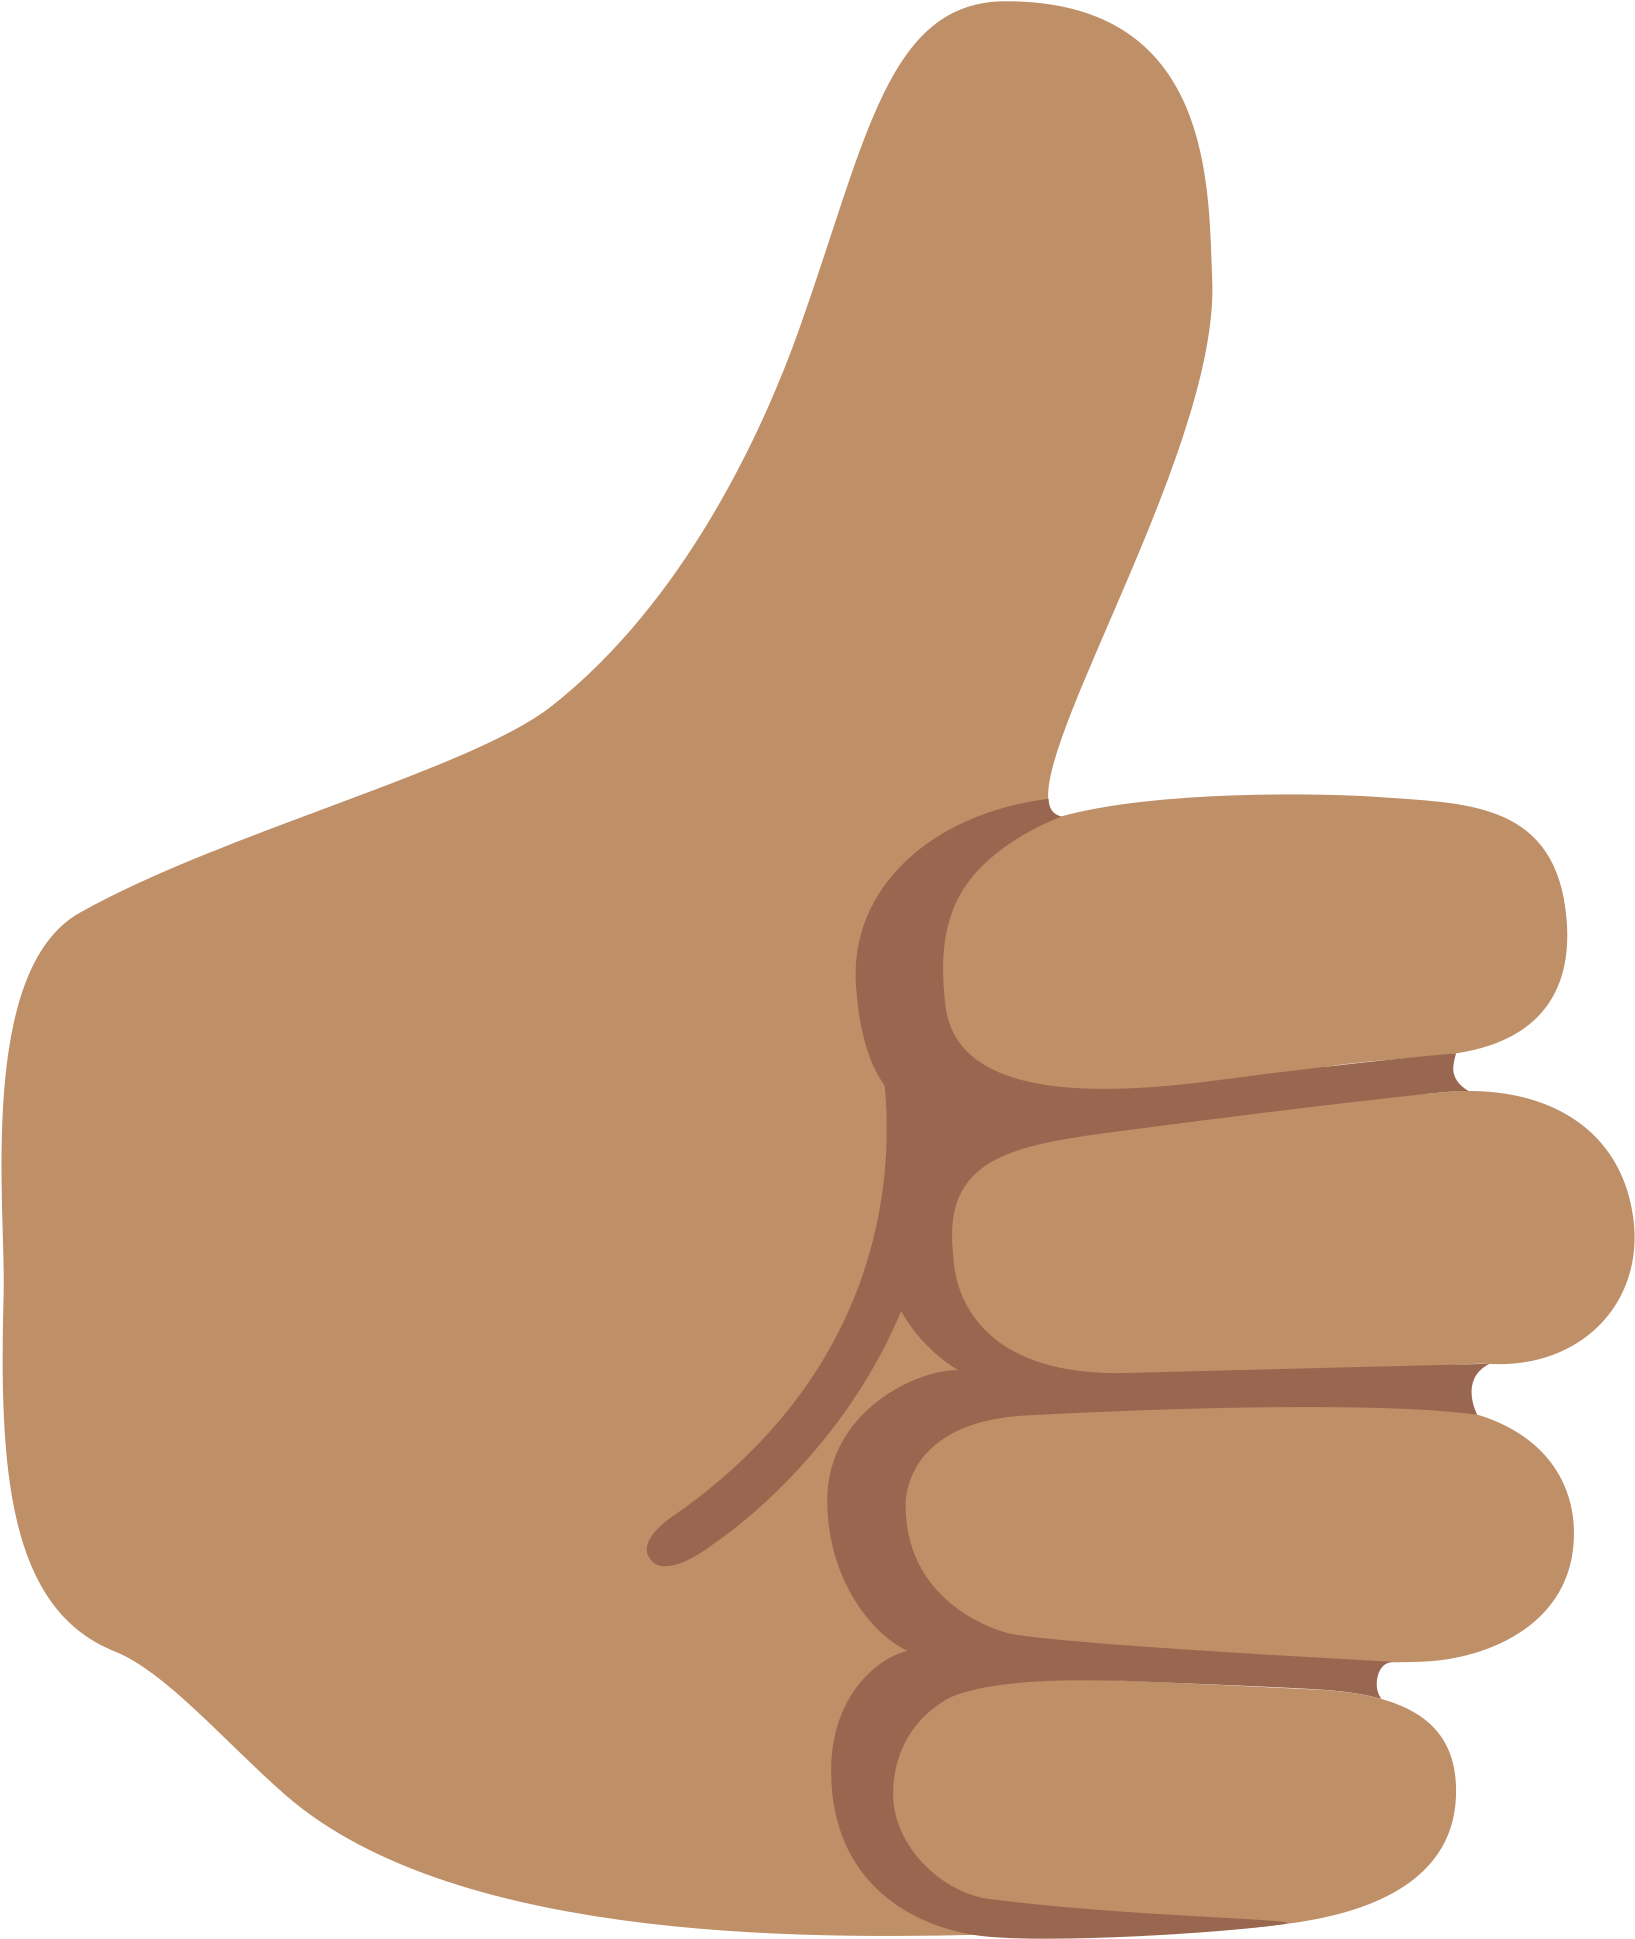 2000 X 2000 10 - Thumbs Up Emoji No Background Clipart (2000x2000), Png Download